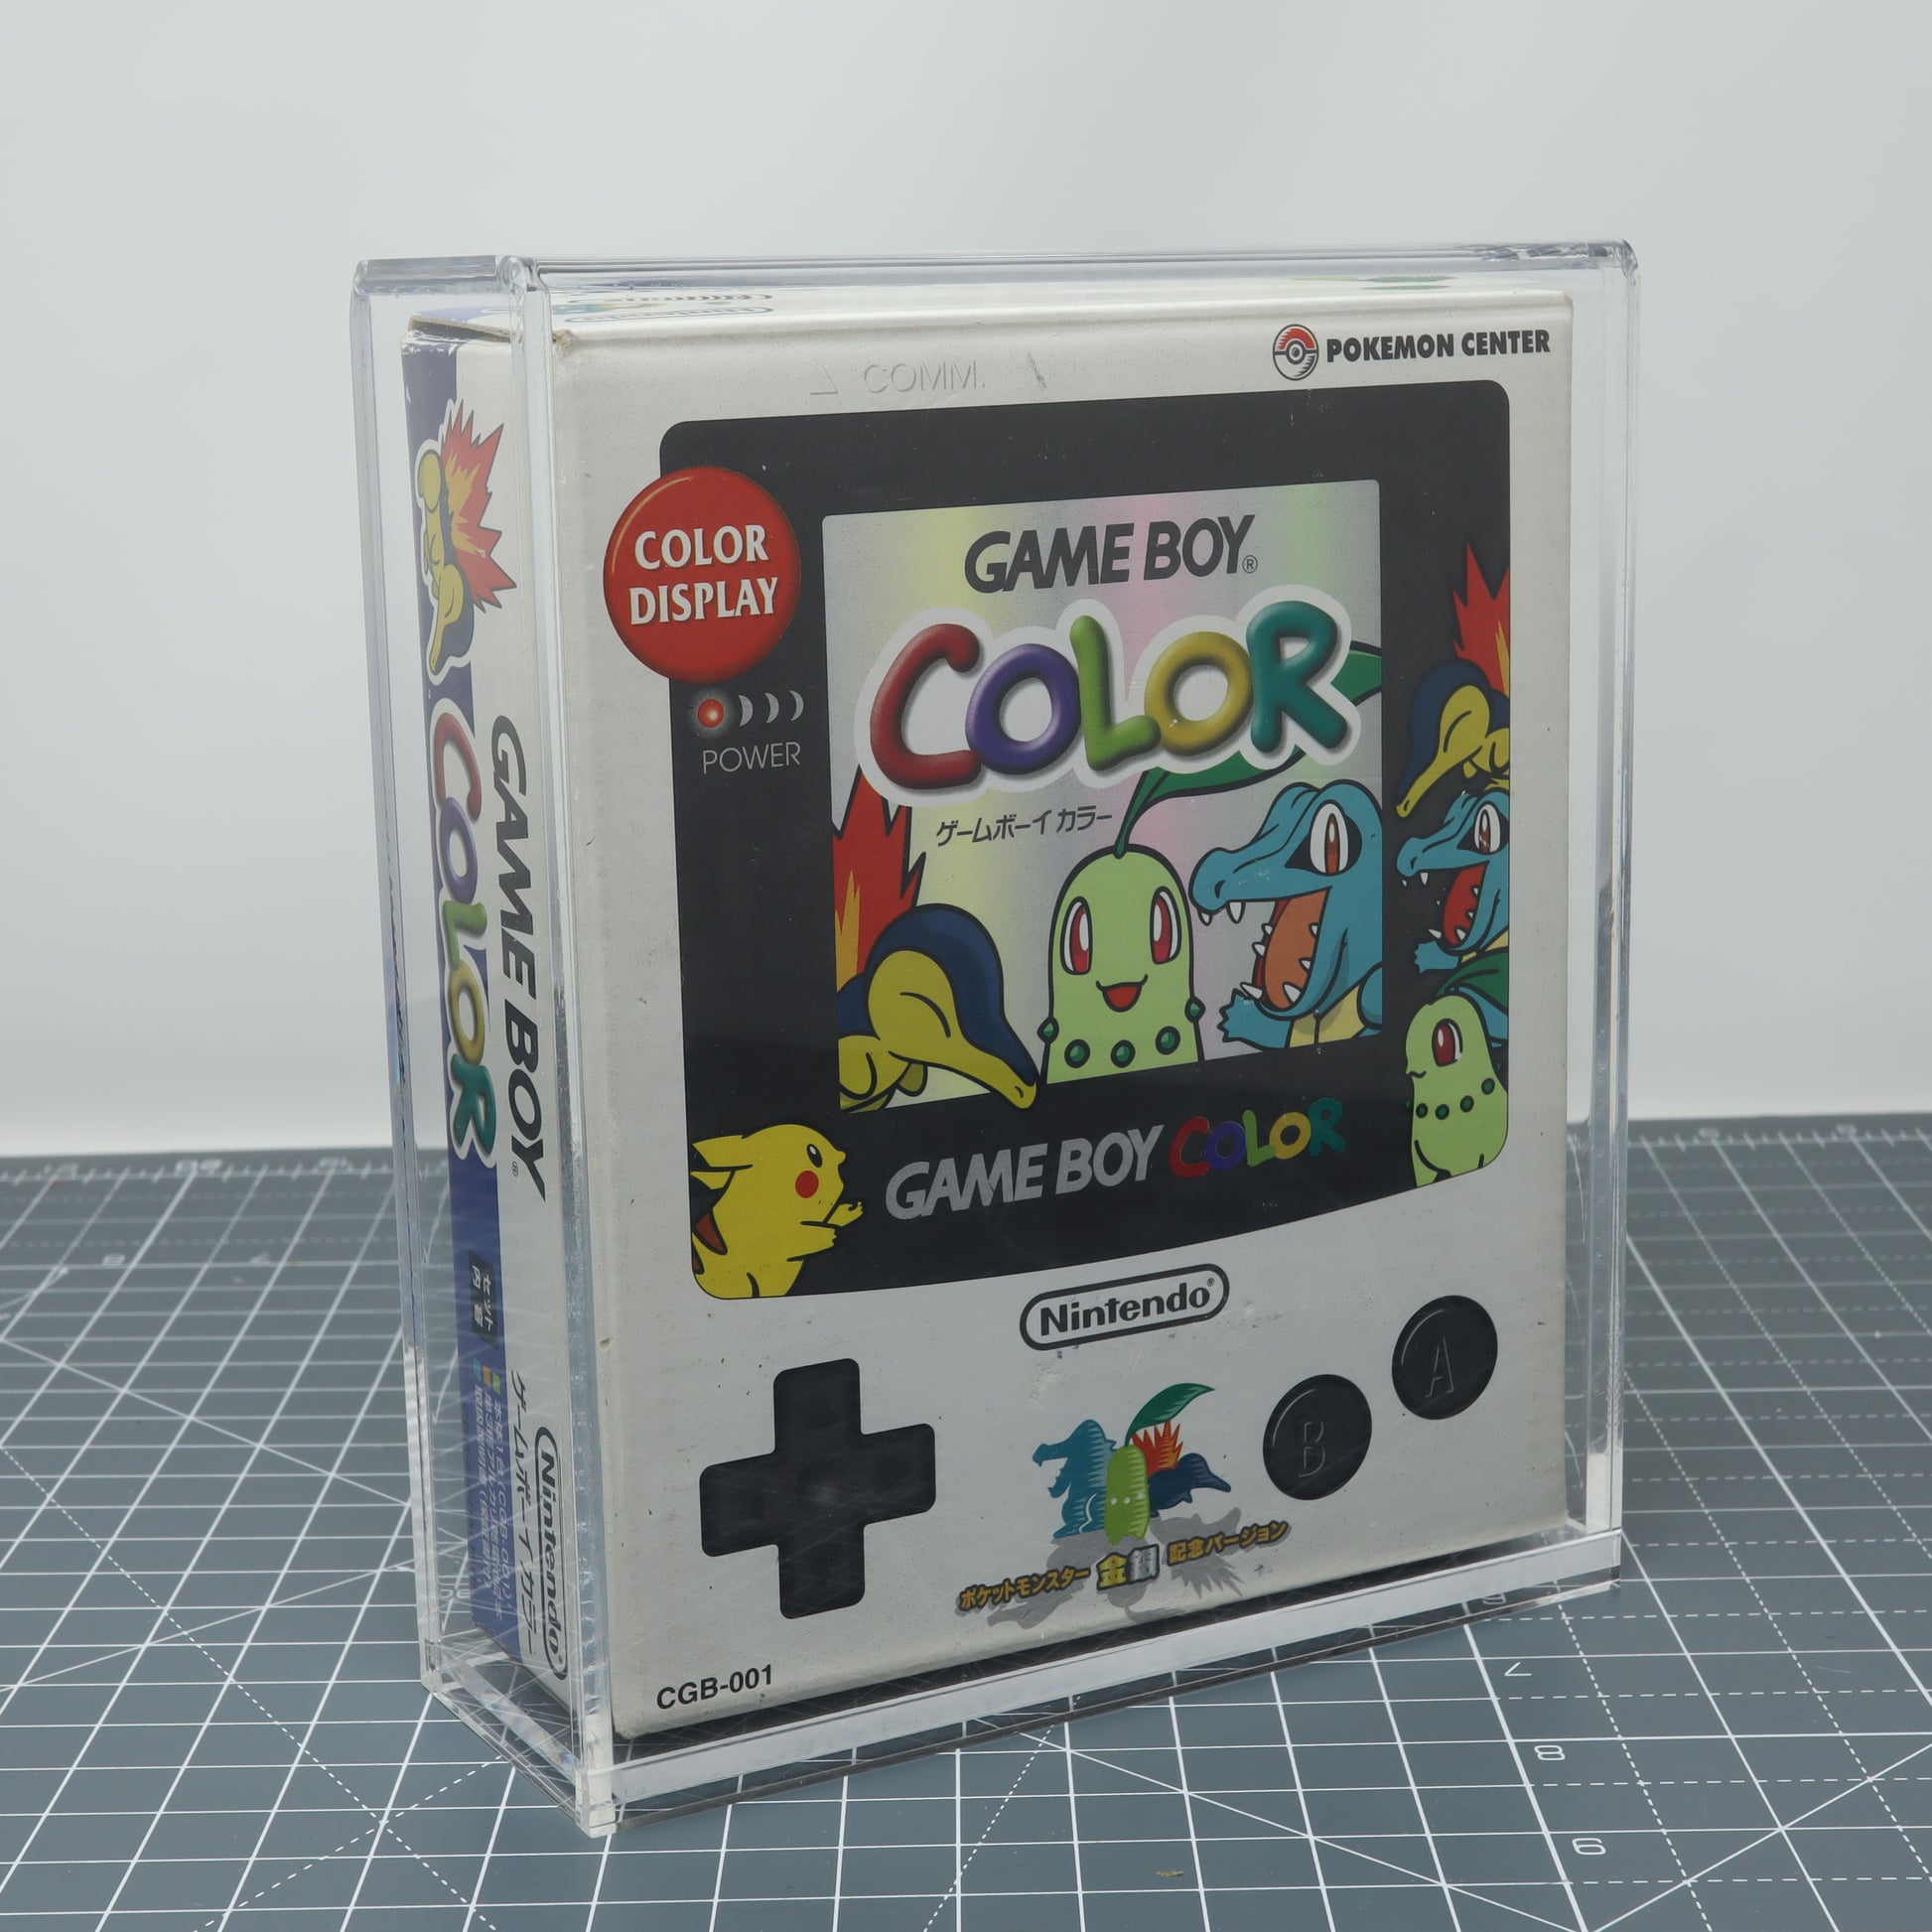 Game Boy Color Pokemon center limited addition boxed console stored inside custom acrylic display capsule front image